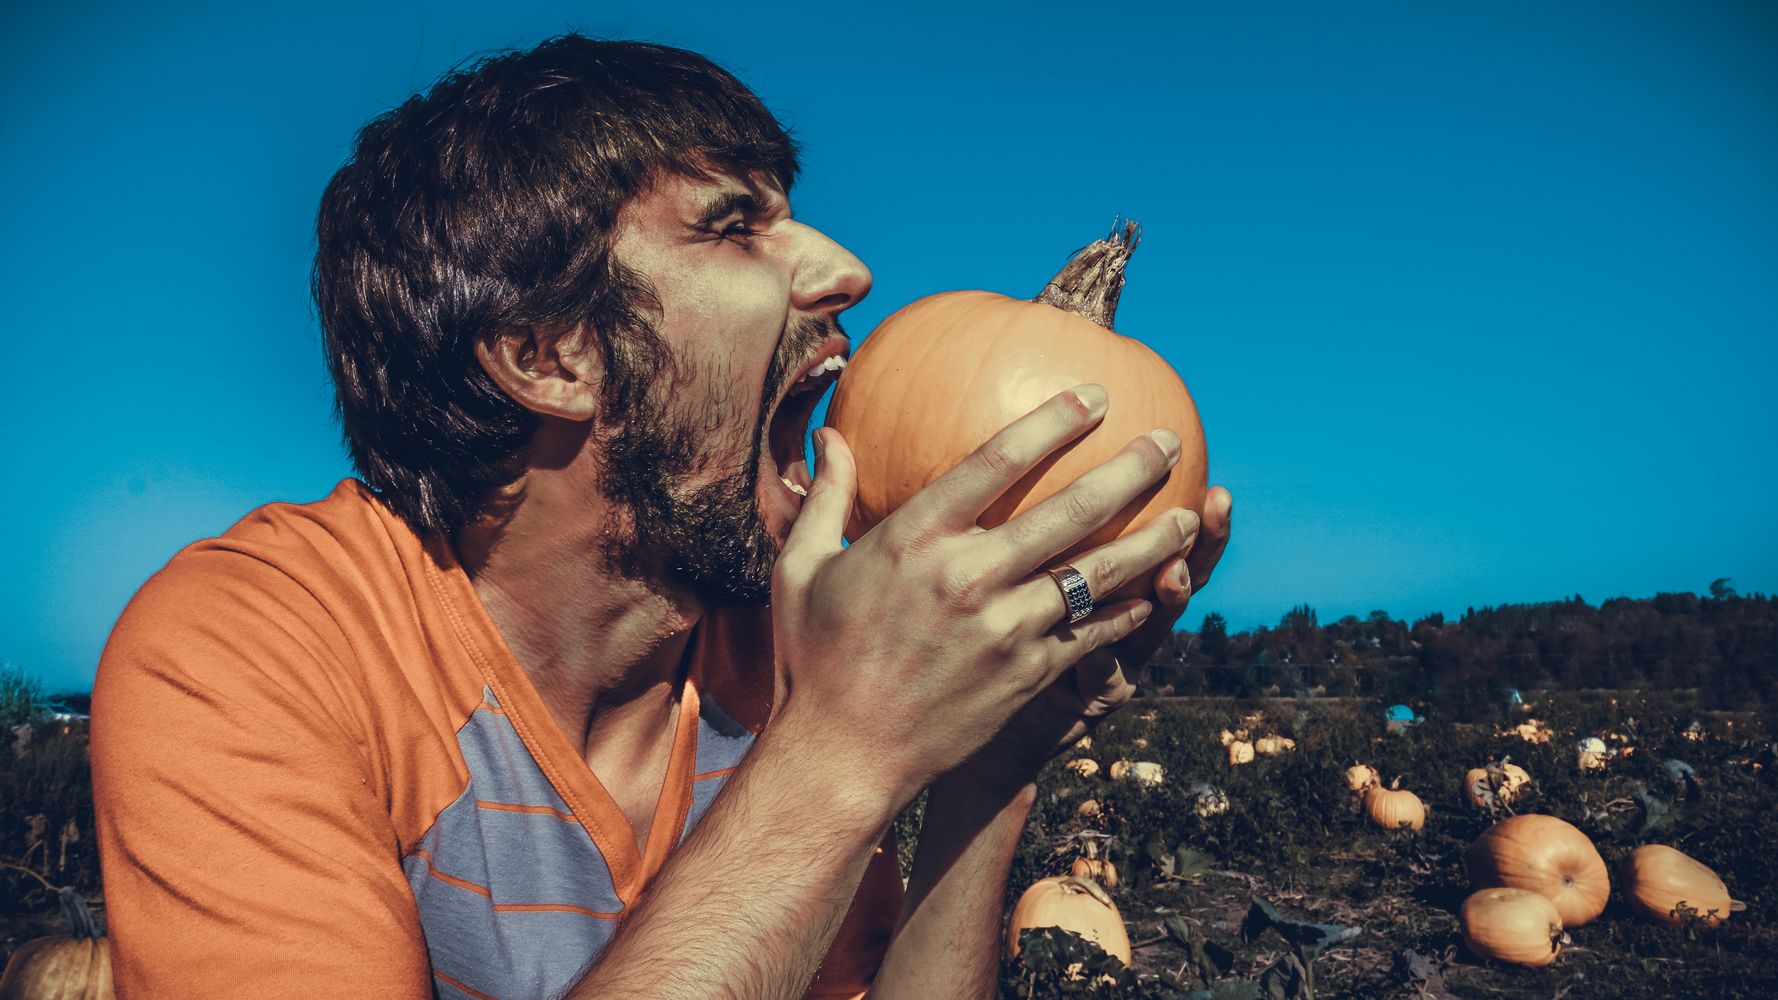 Man Feasting On Pumpkin With Blue Sky Background